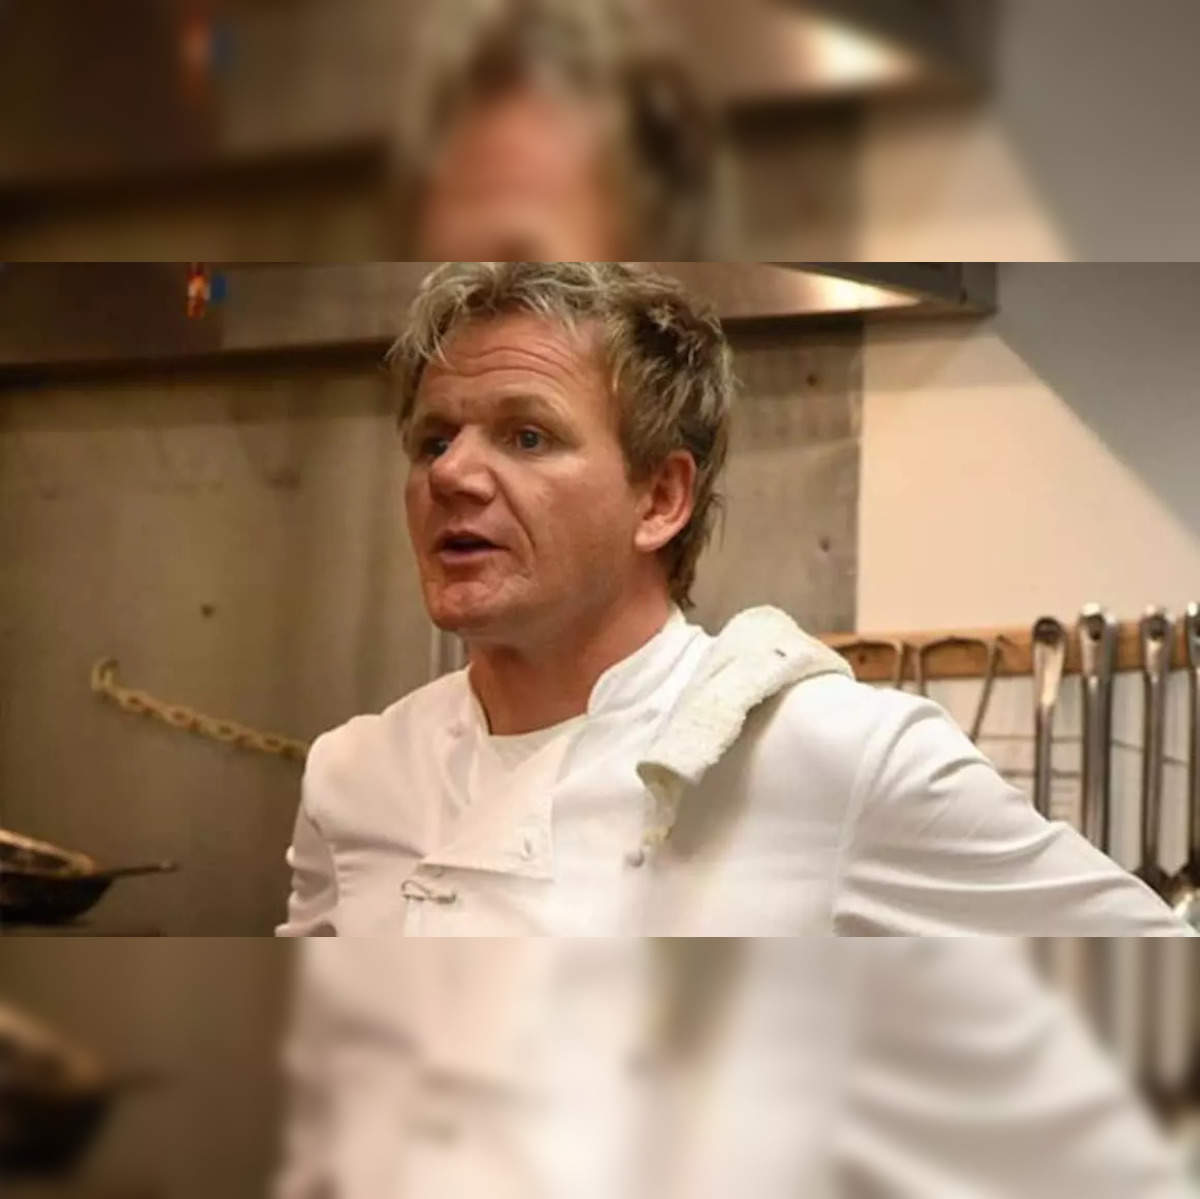 Kitchen Nightmares Season 8 Heres When And Where To Watch On Tv Stream And More 